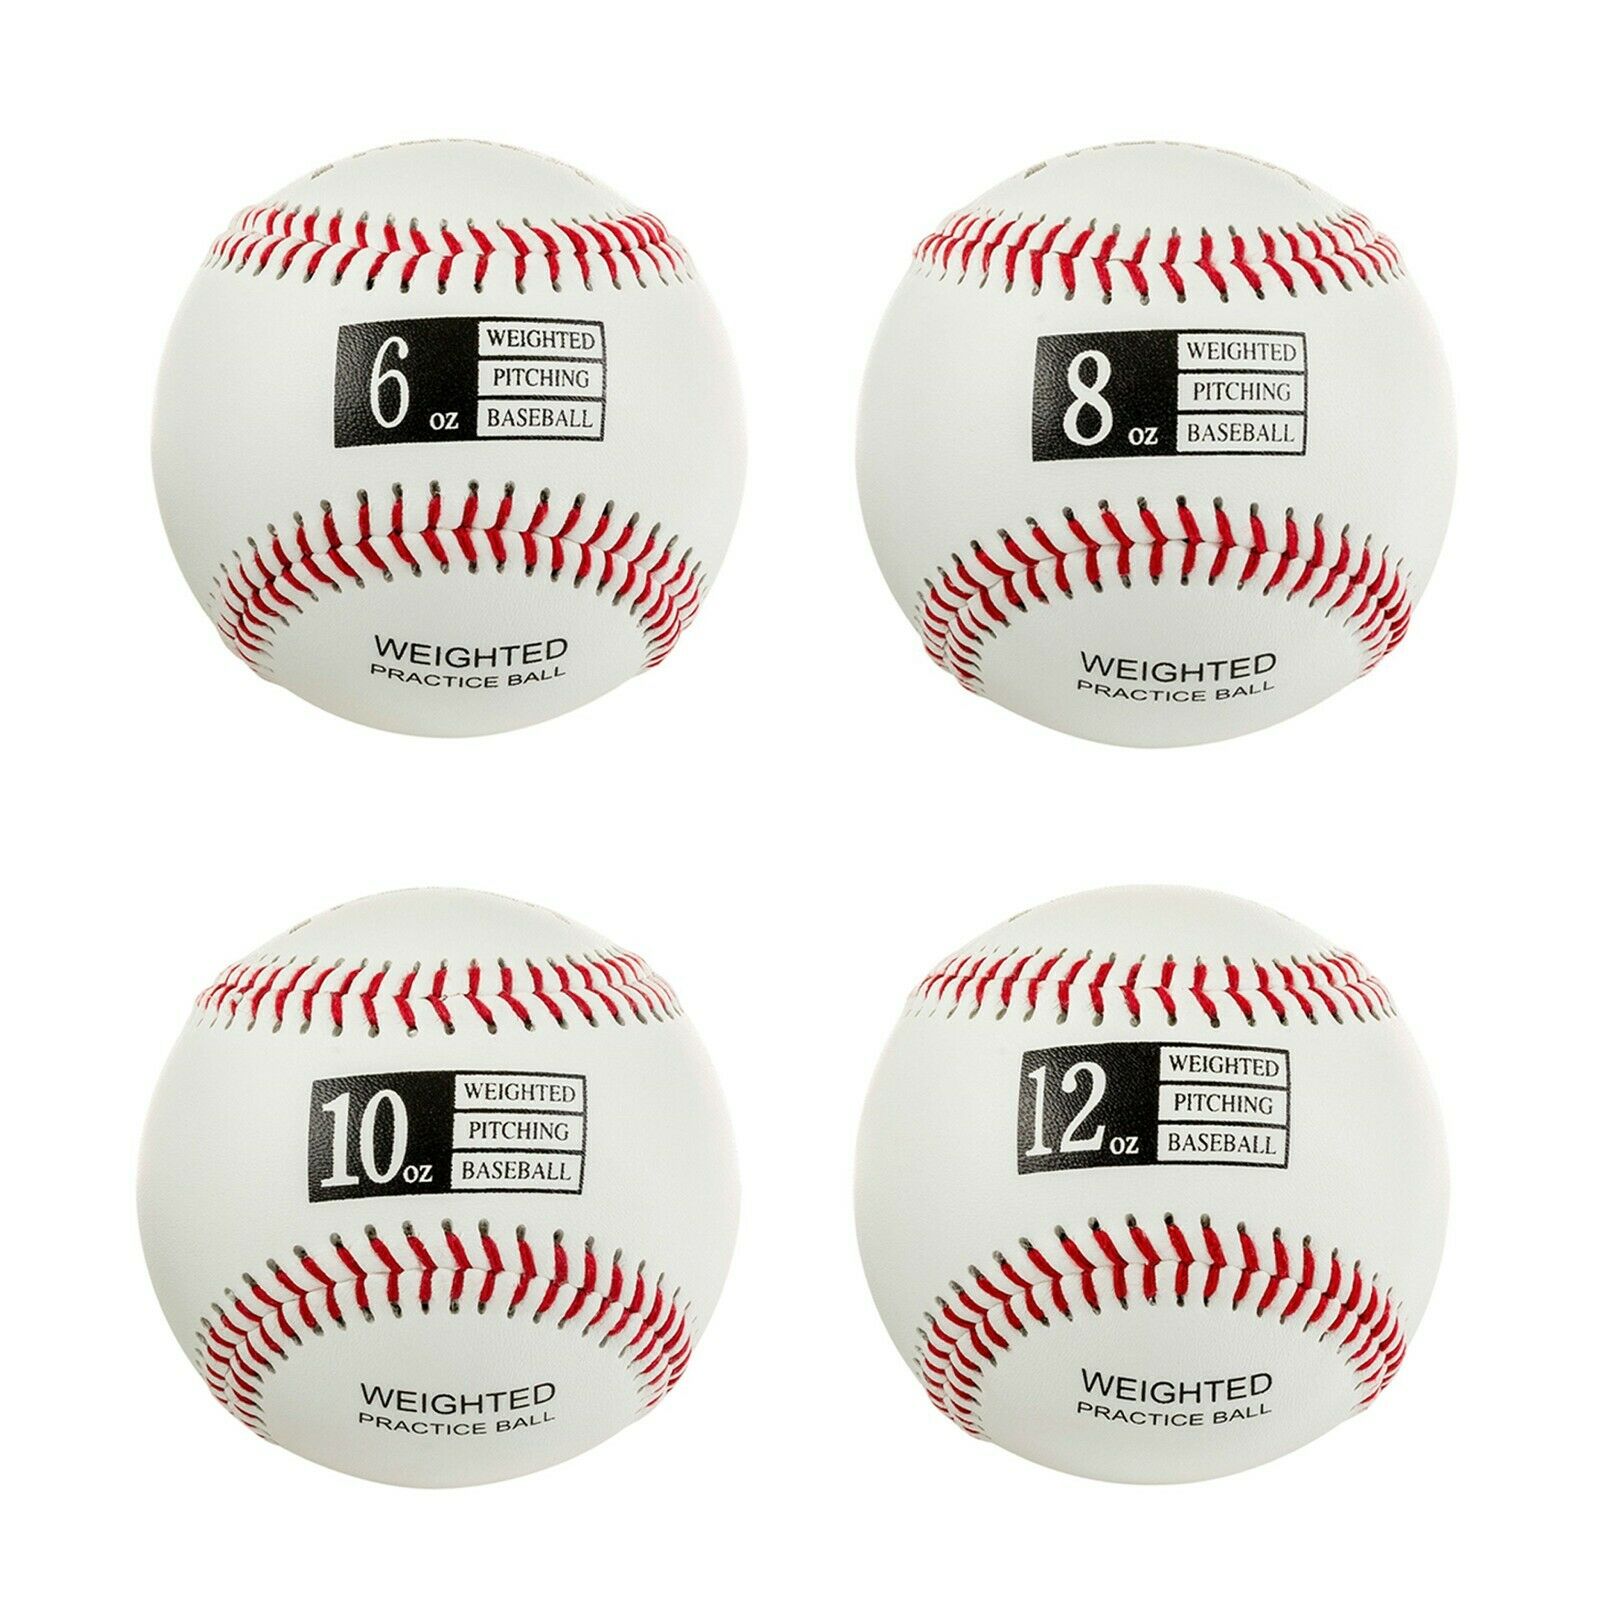 Thorza Weighted Baseballs For Throwing - Help Increase Pitch Velocity - Set Of 4